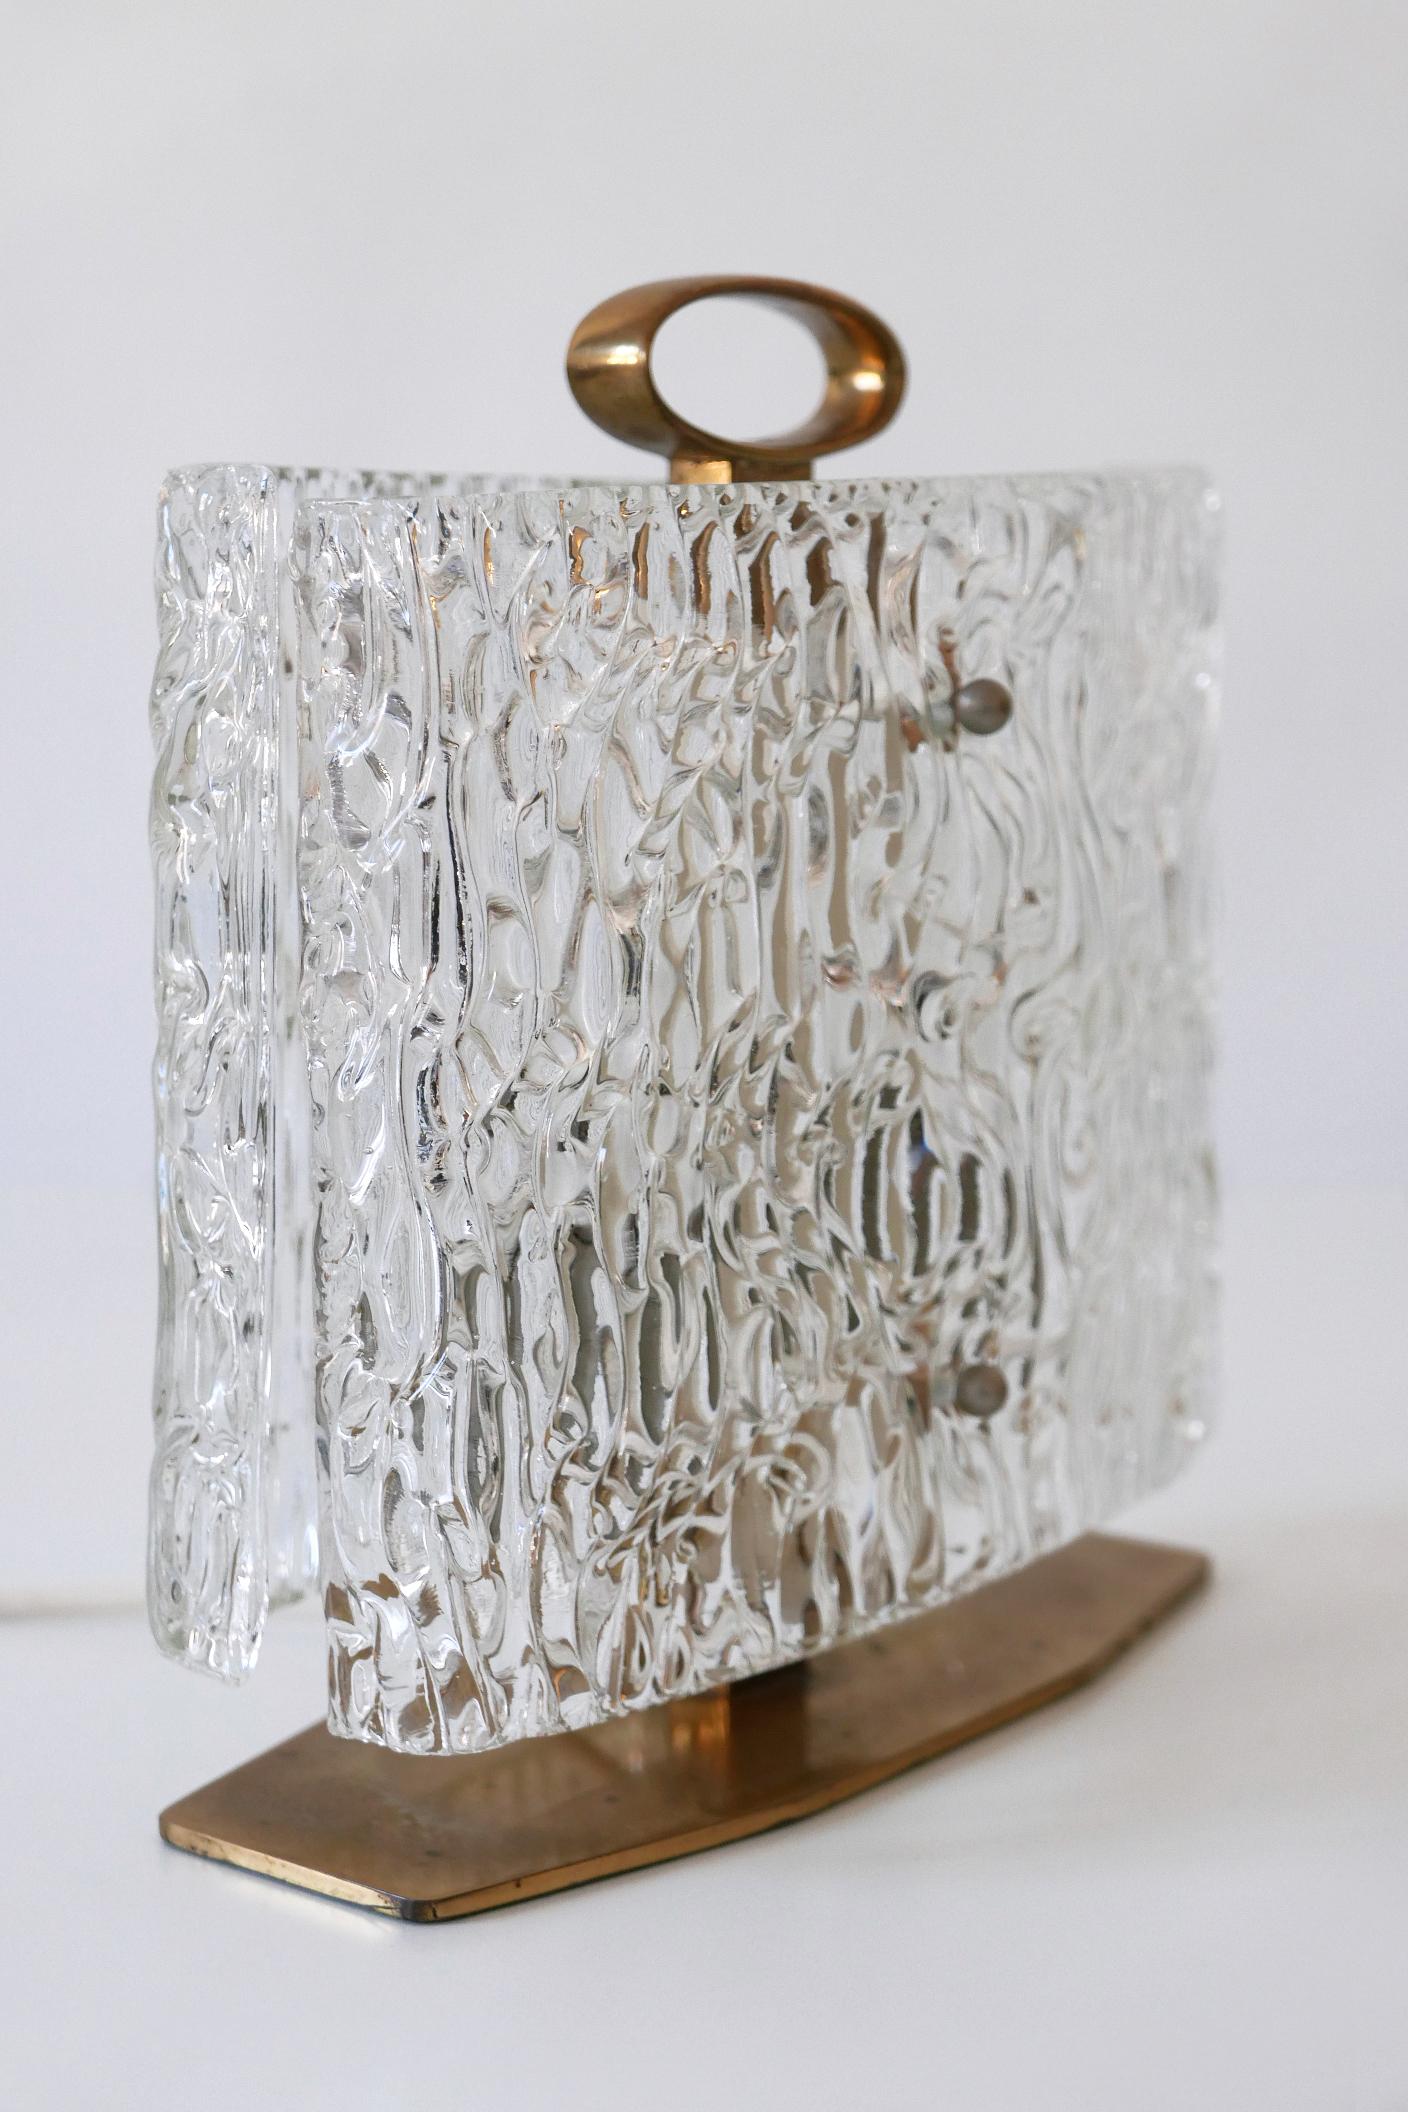 Exceptional Mid-Century Modern Table Lamp with Ice Glass Shade, 1950s, Italy For Sale 6